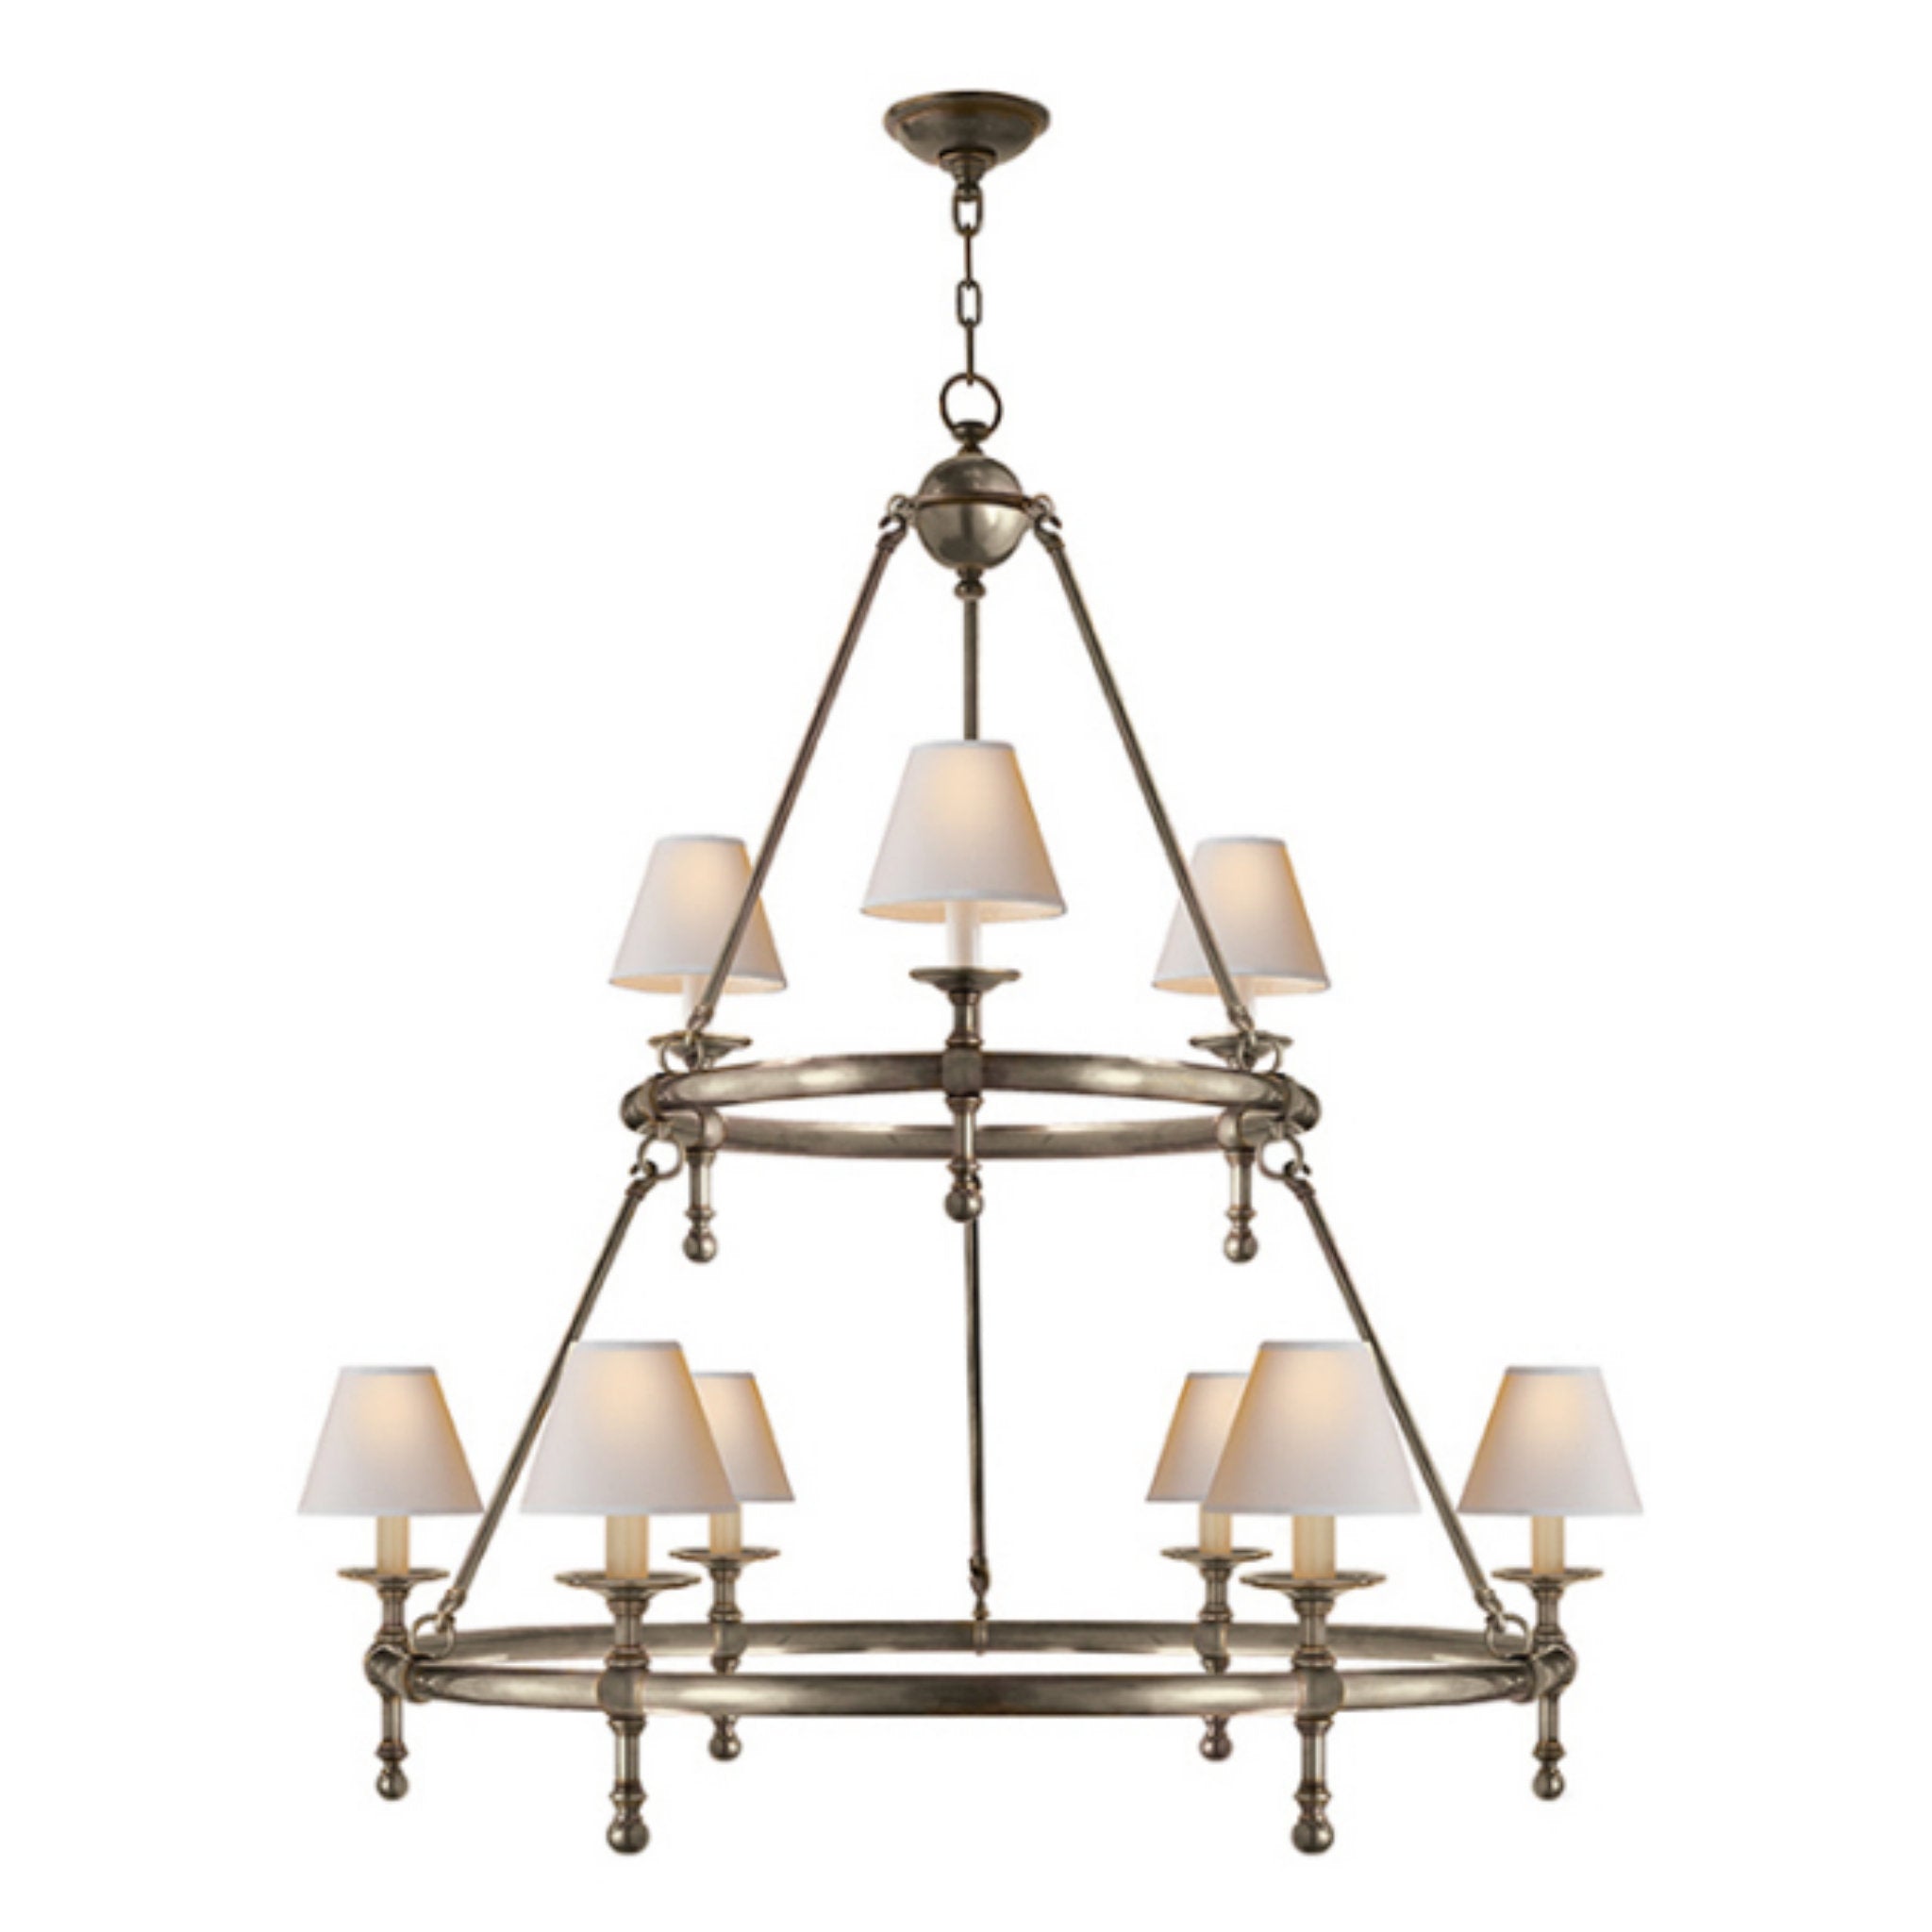 Chapman & Myers Classic Two-Tier Ring Chandelier in Antique Nickel wit